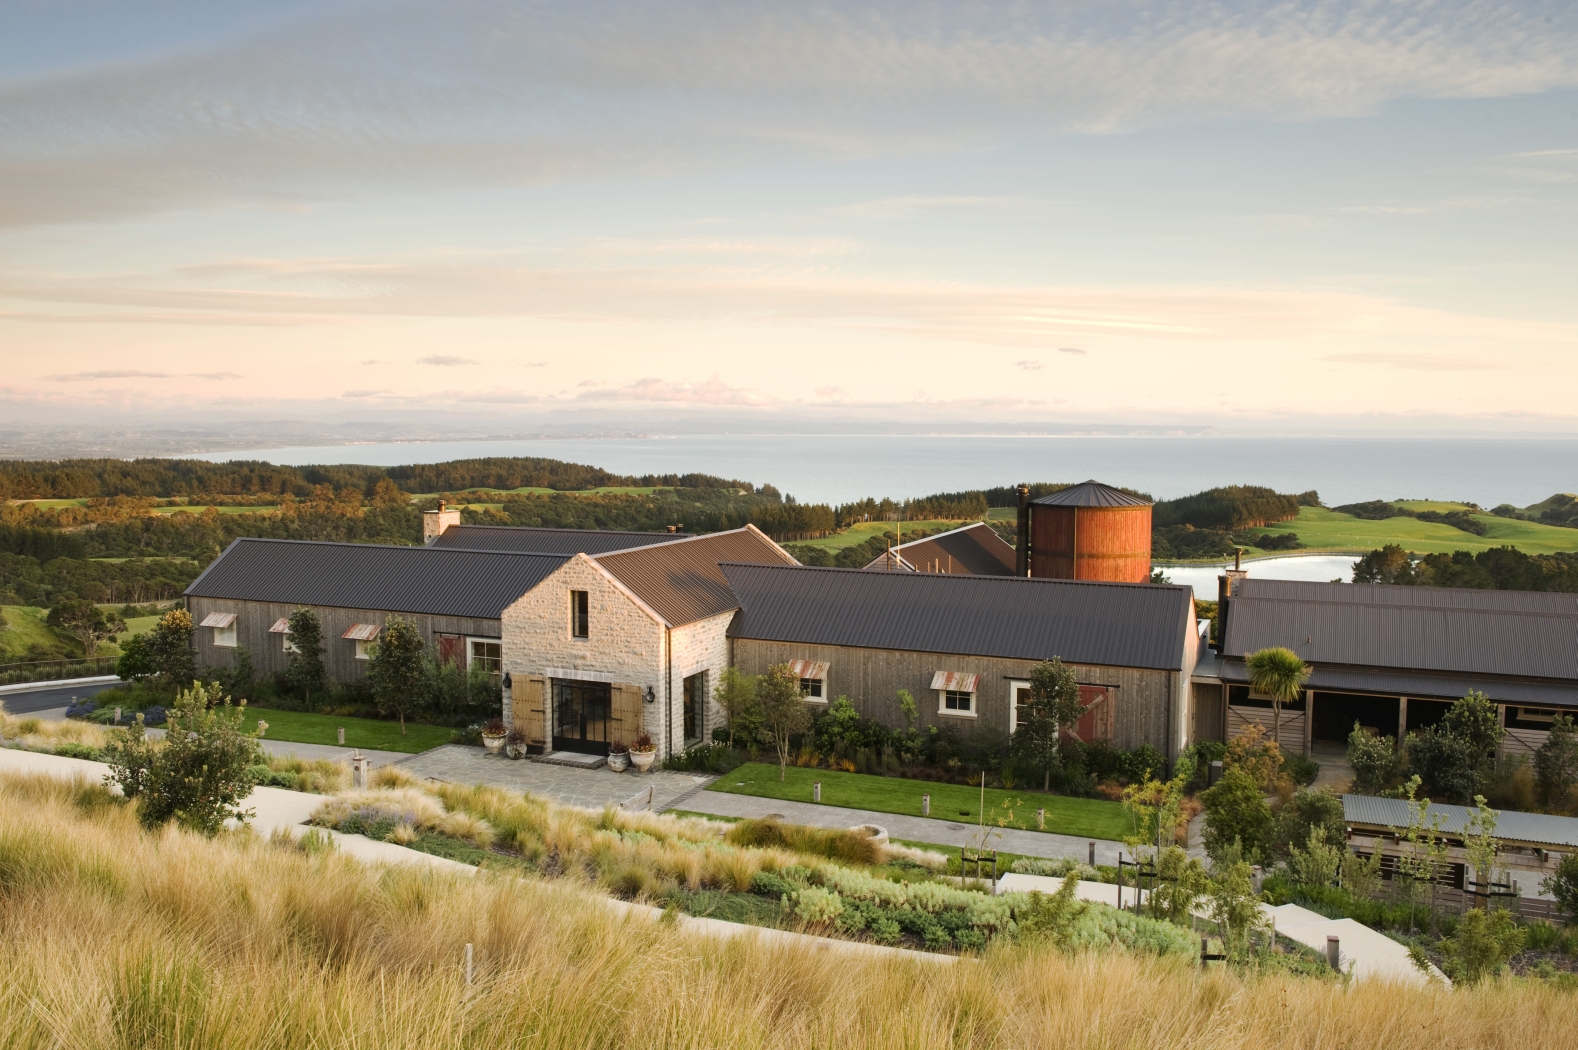 The exterior of The Farm at Cape Kidnappers, New Zealand